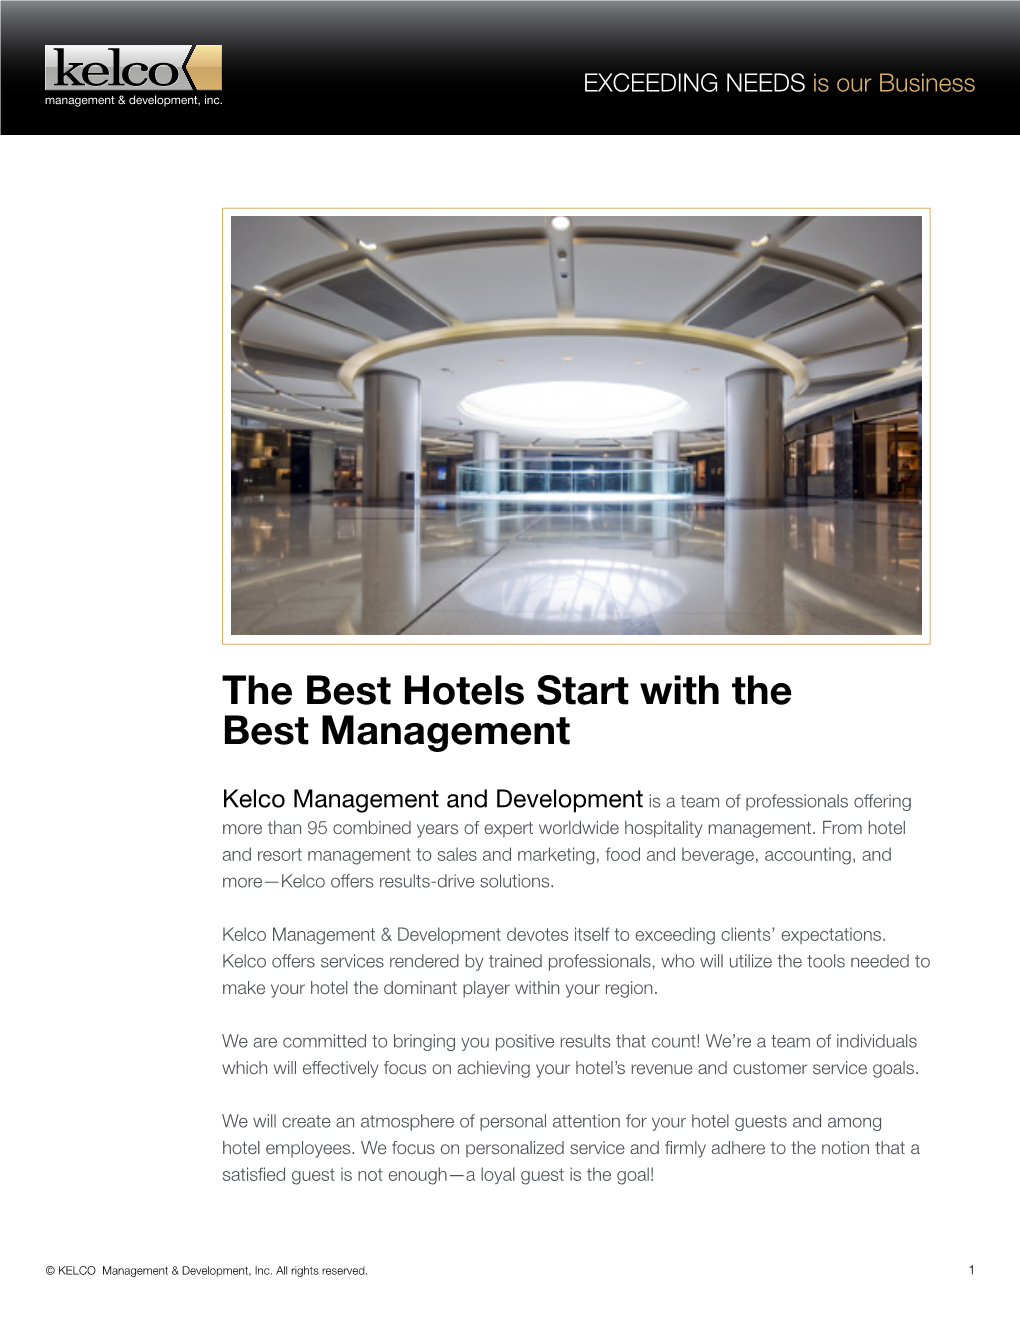 The Best Hotels Start with the Best Management